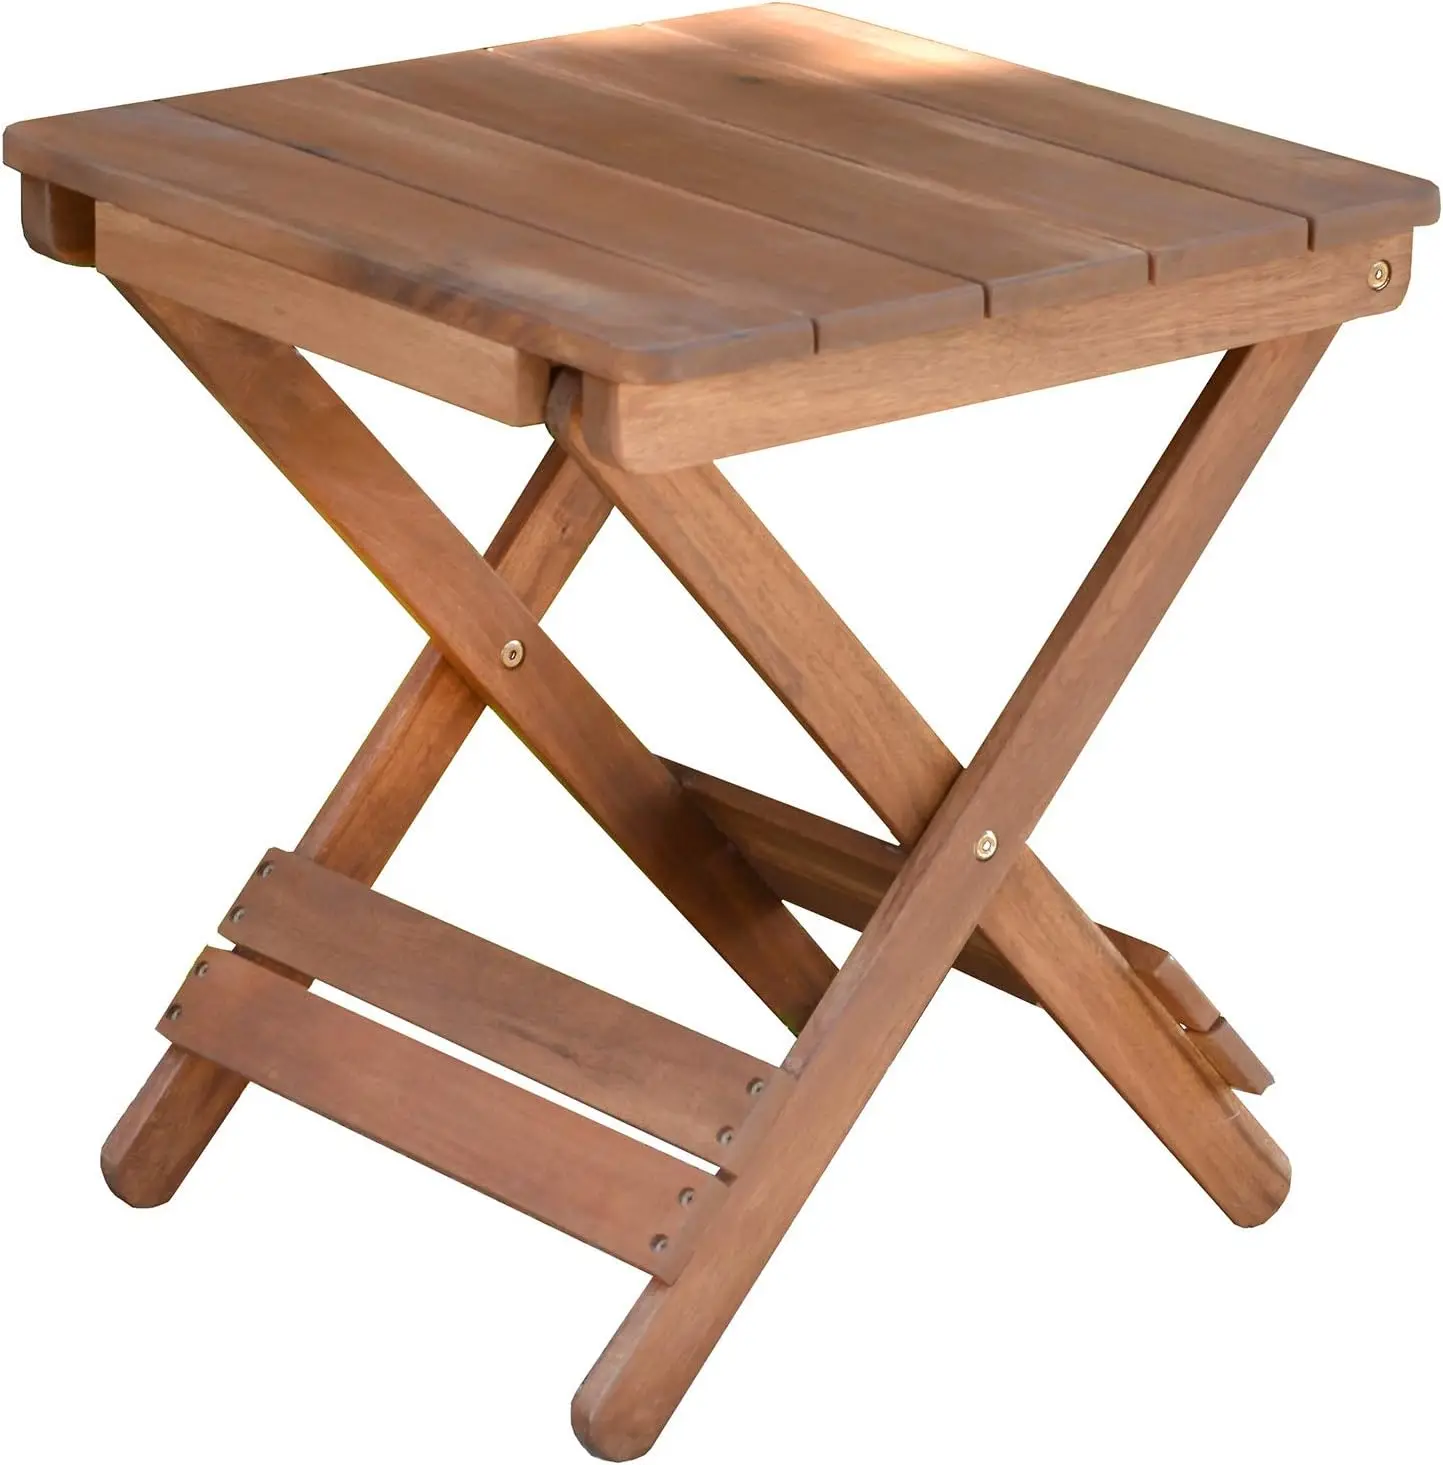 

Side Table - Small Folding Tables for , Porch, Deck, Fire Pit, Backyard Party or BBQ, Made of Hardwood